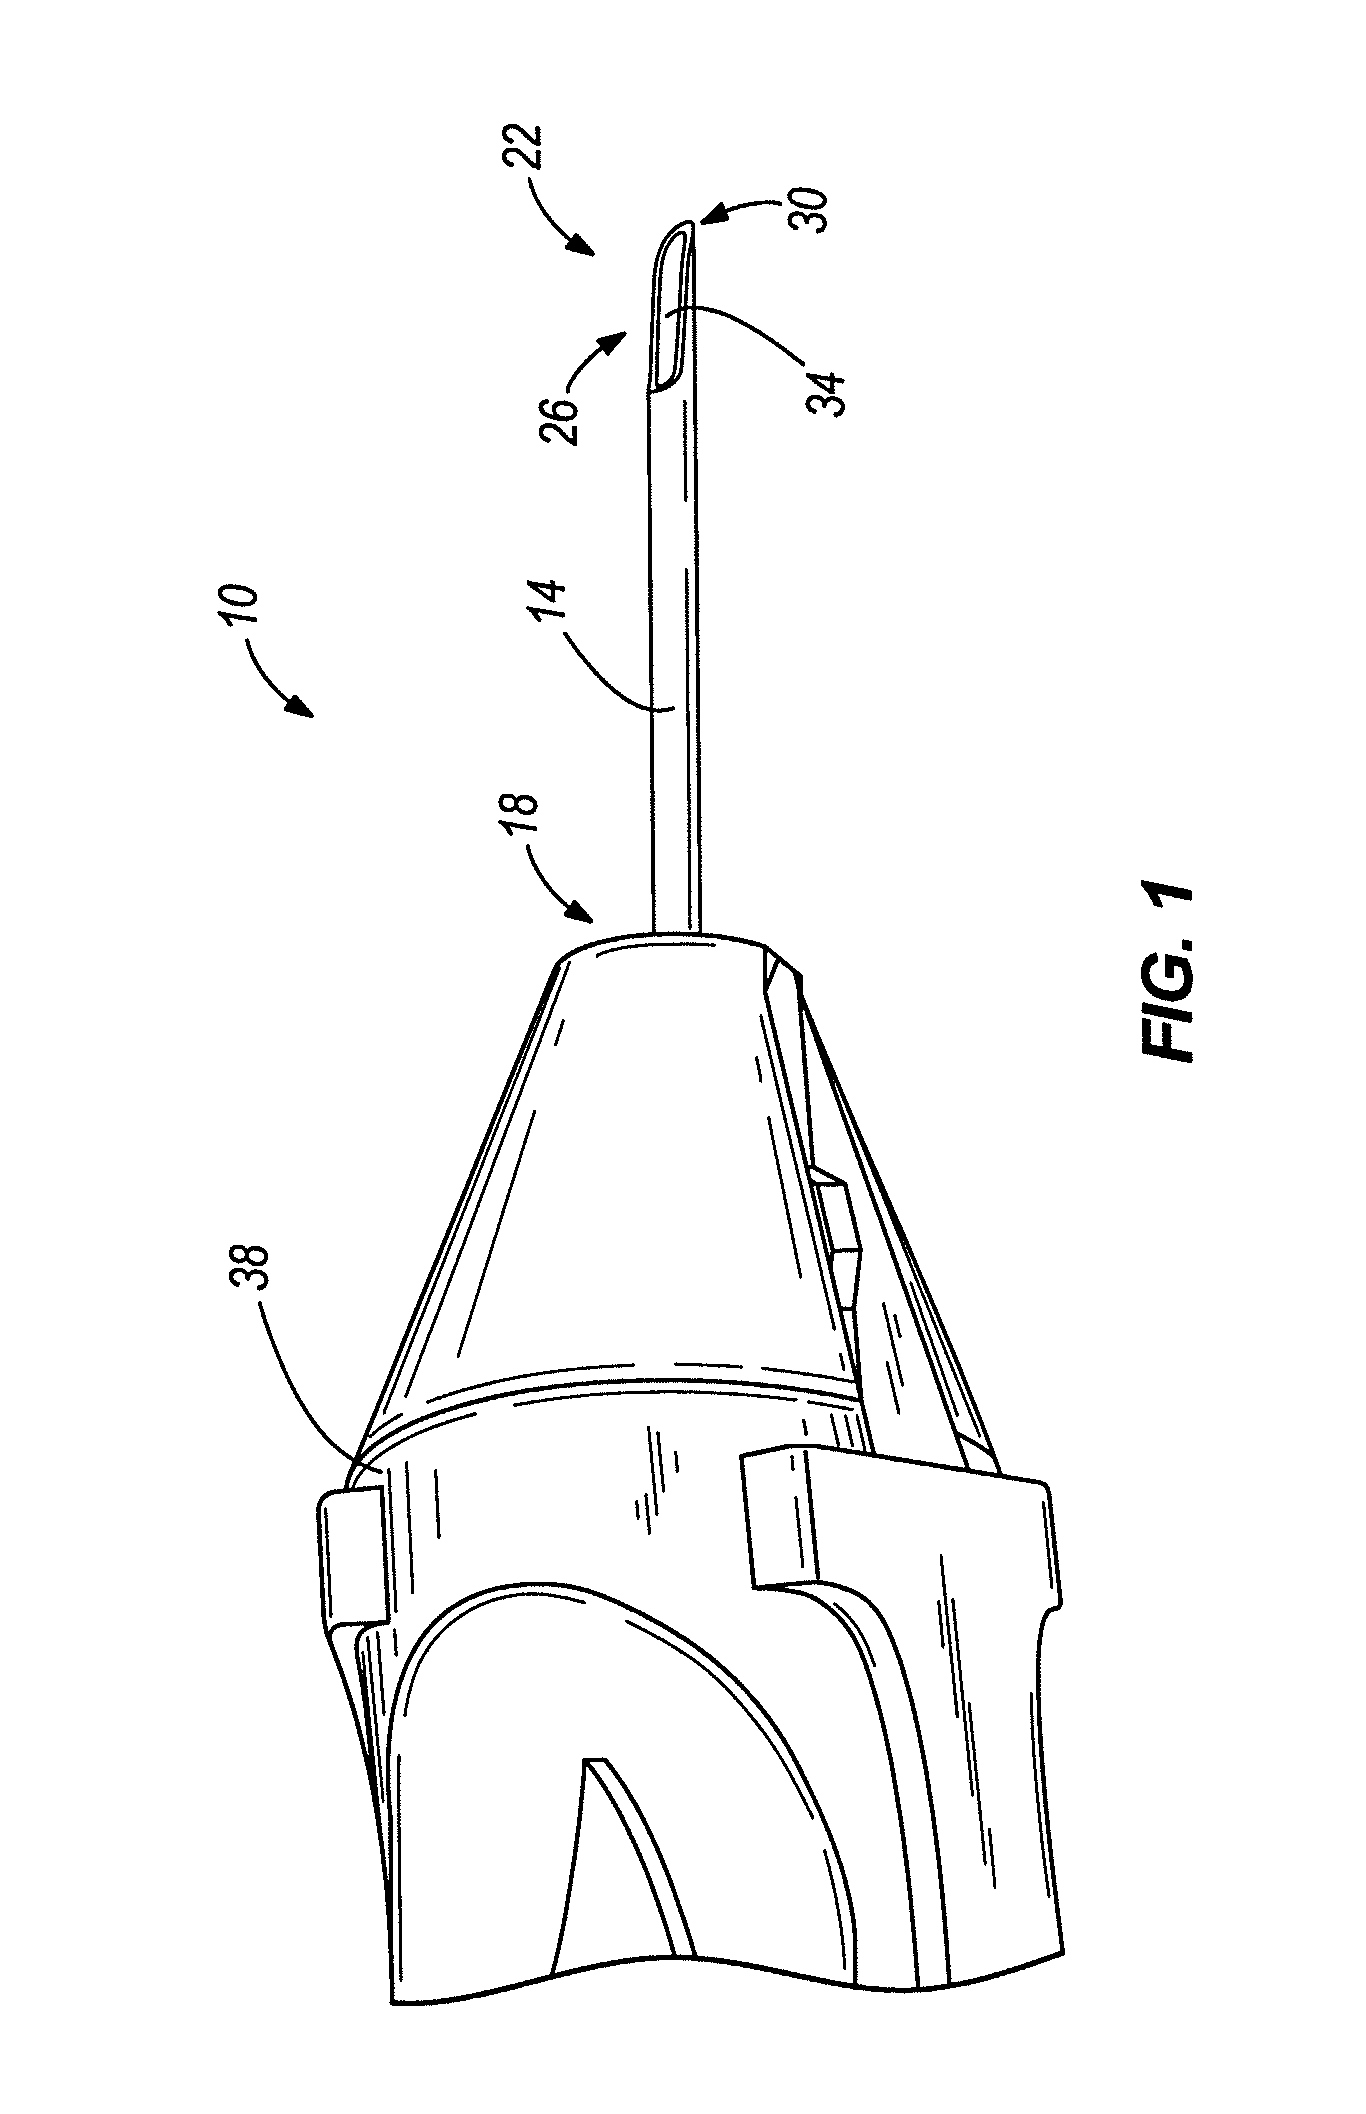 Insertion apparatus having a concave surface